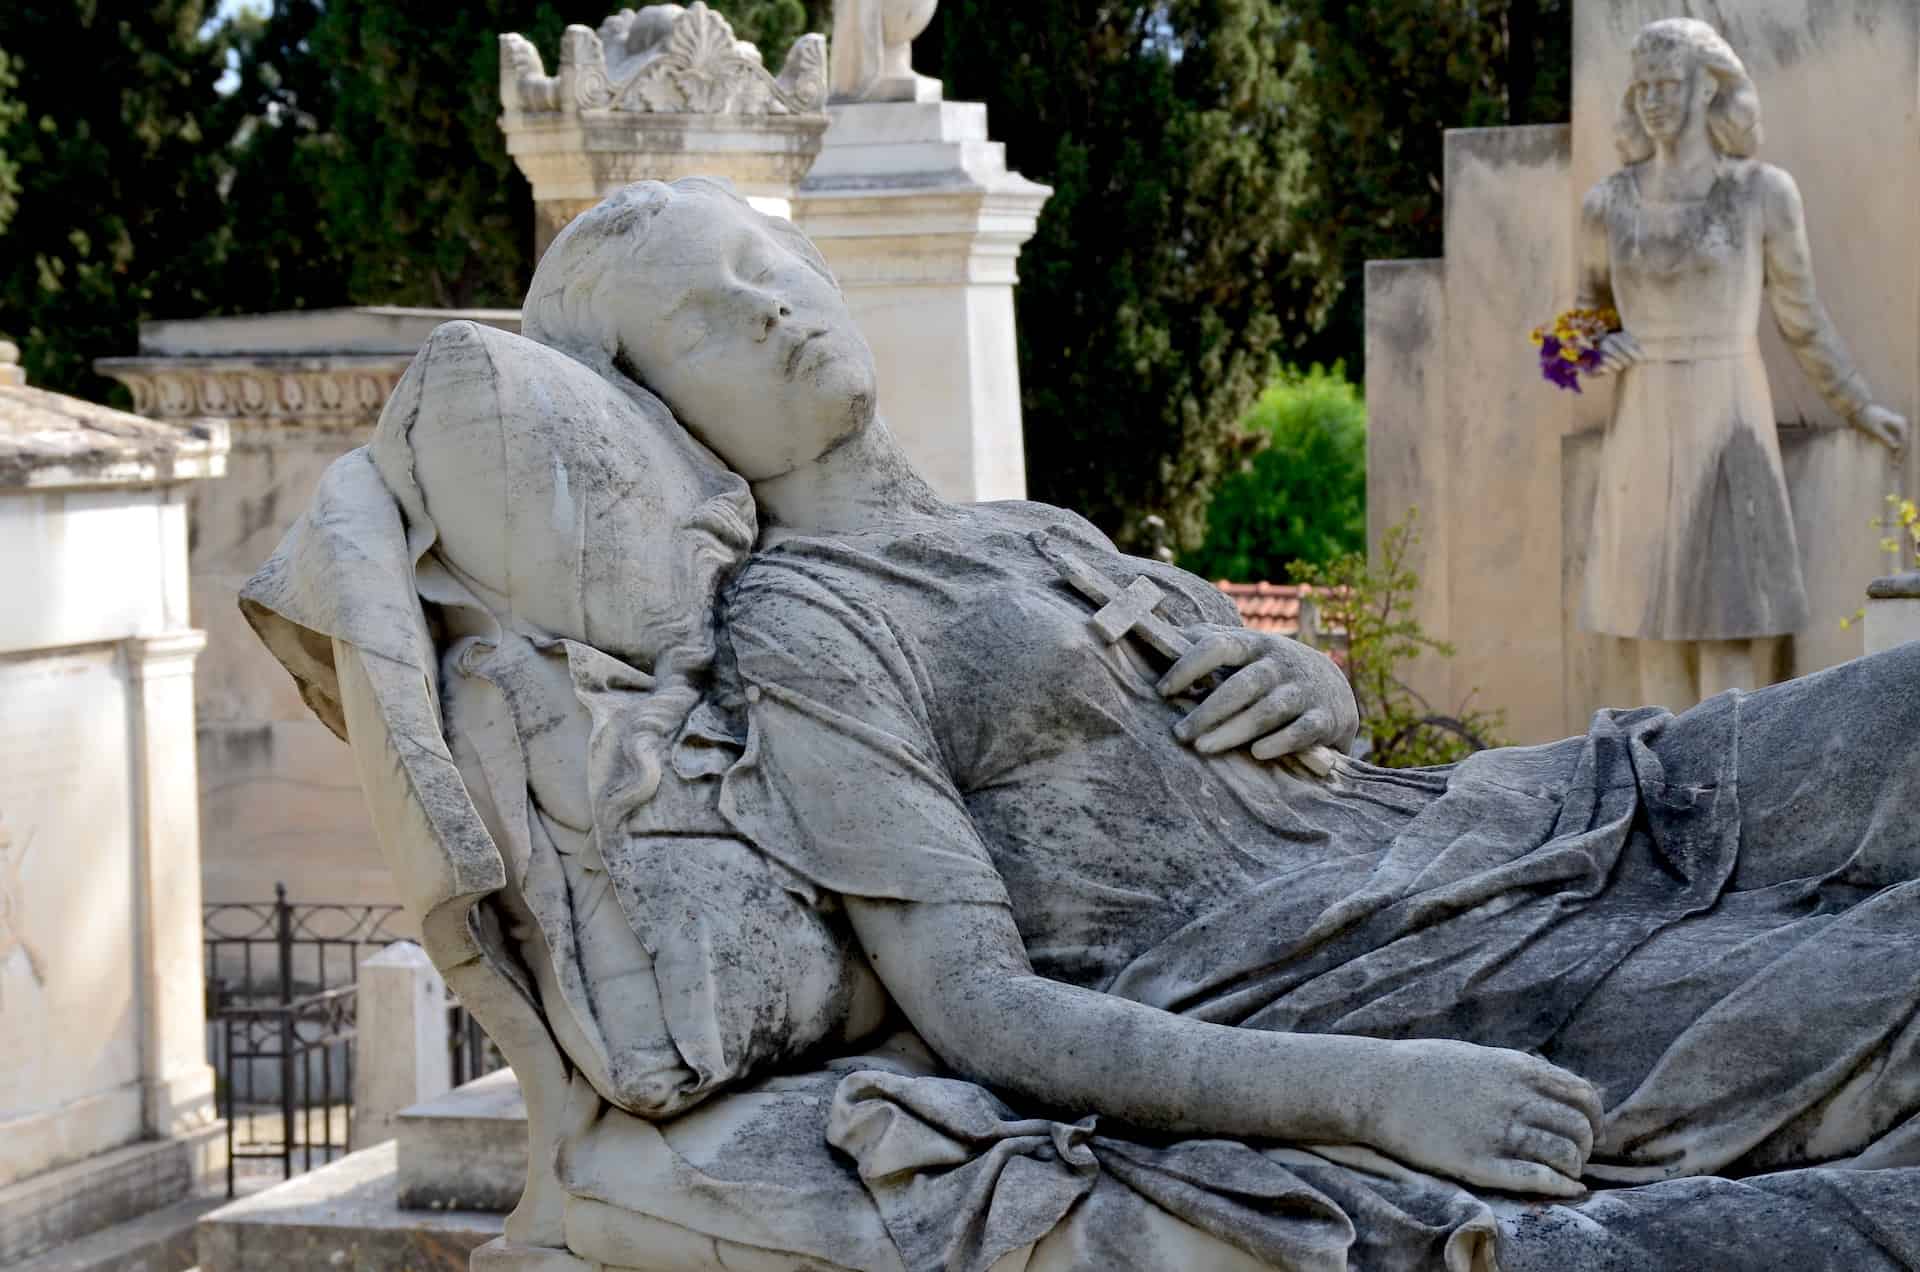 Sleeping Girl on the tomb of Sophia Afentaki at the First Cemetery of Athens, Greece